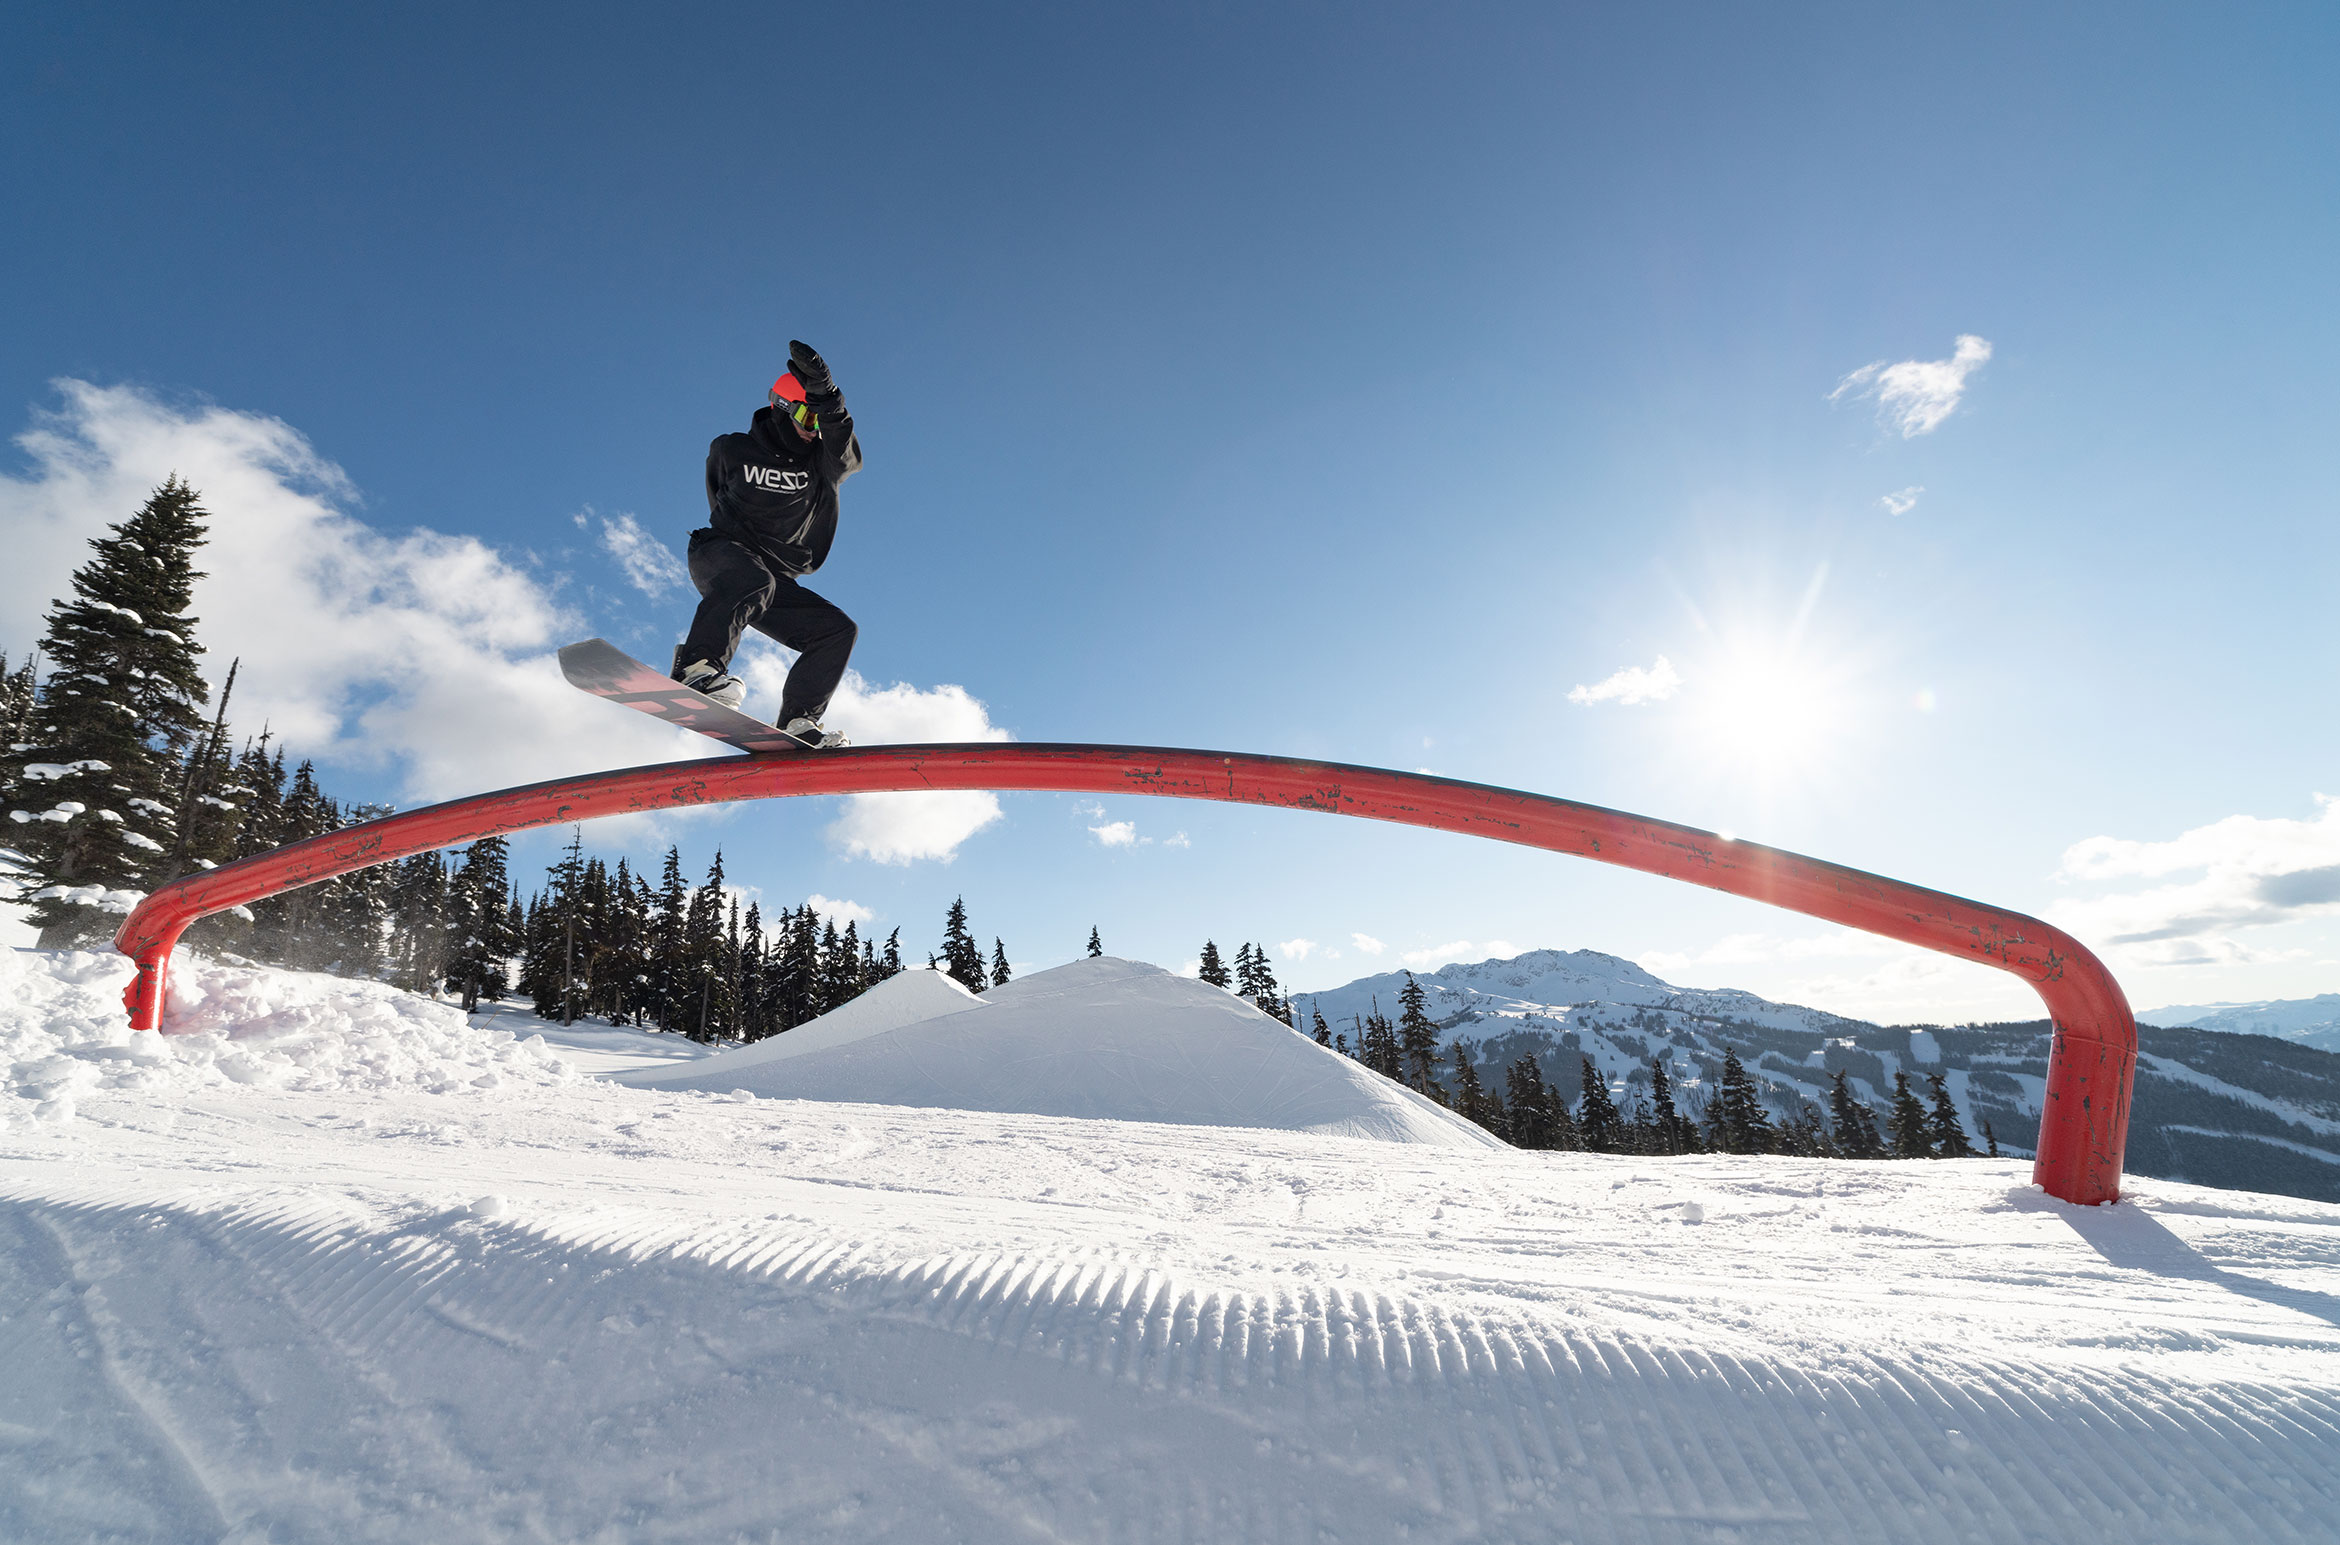 A snowboarder hits a rail in the park on Whistler Blackcomb.